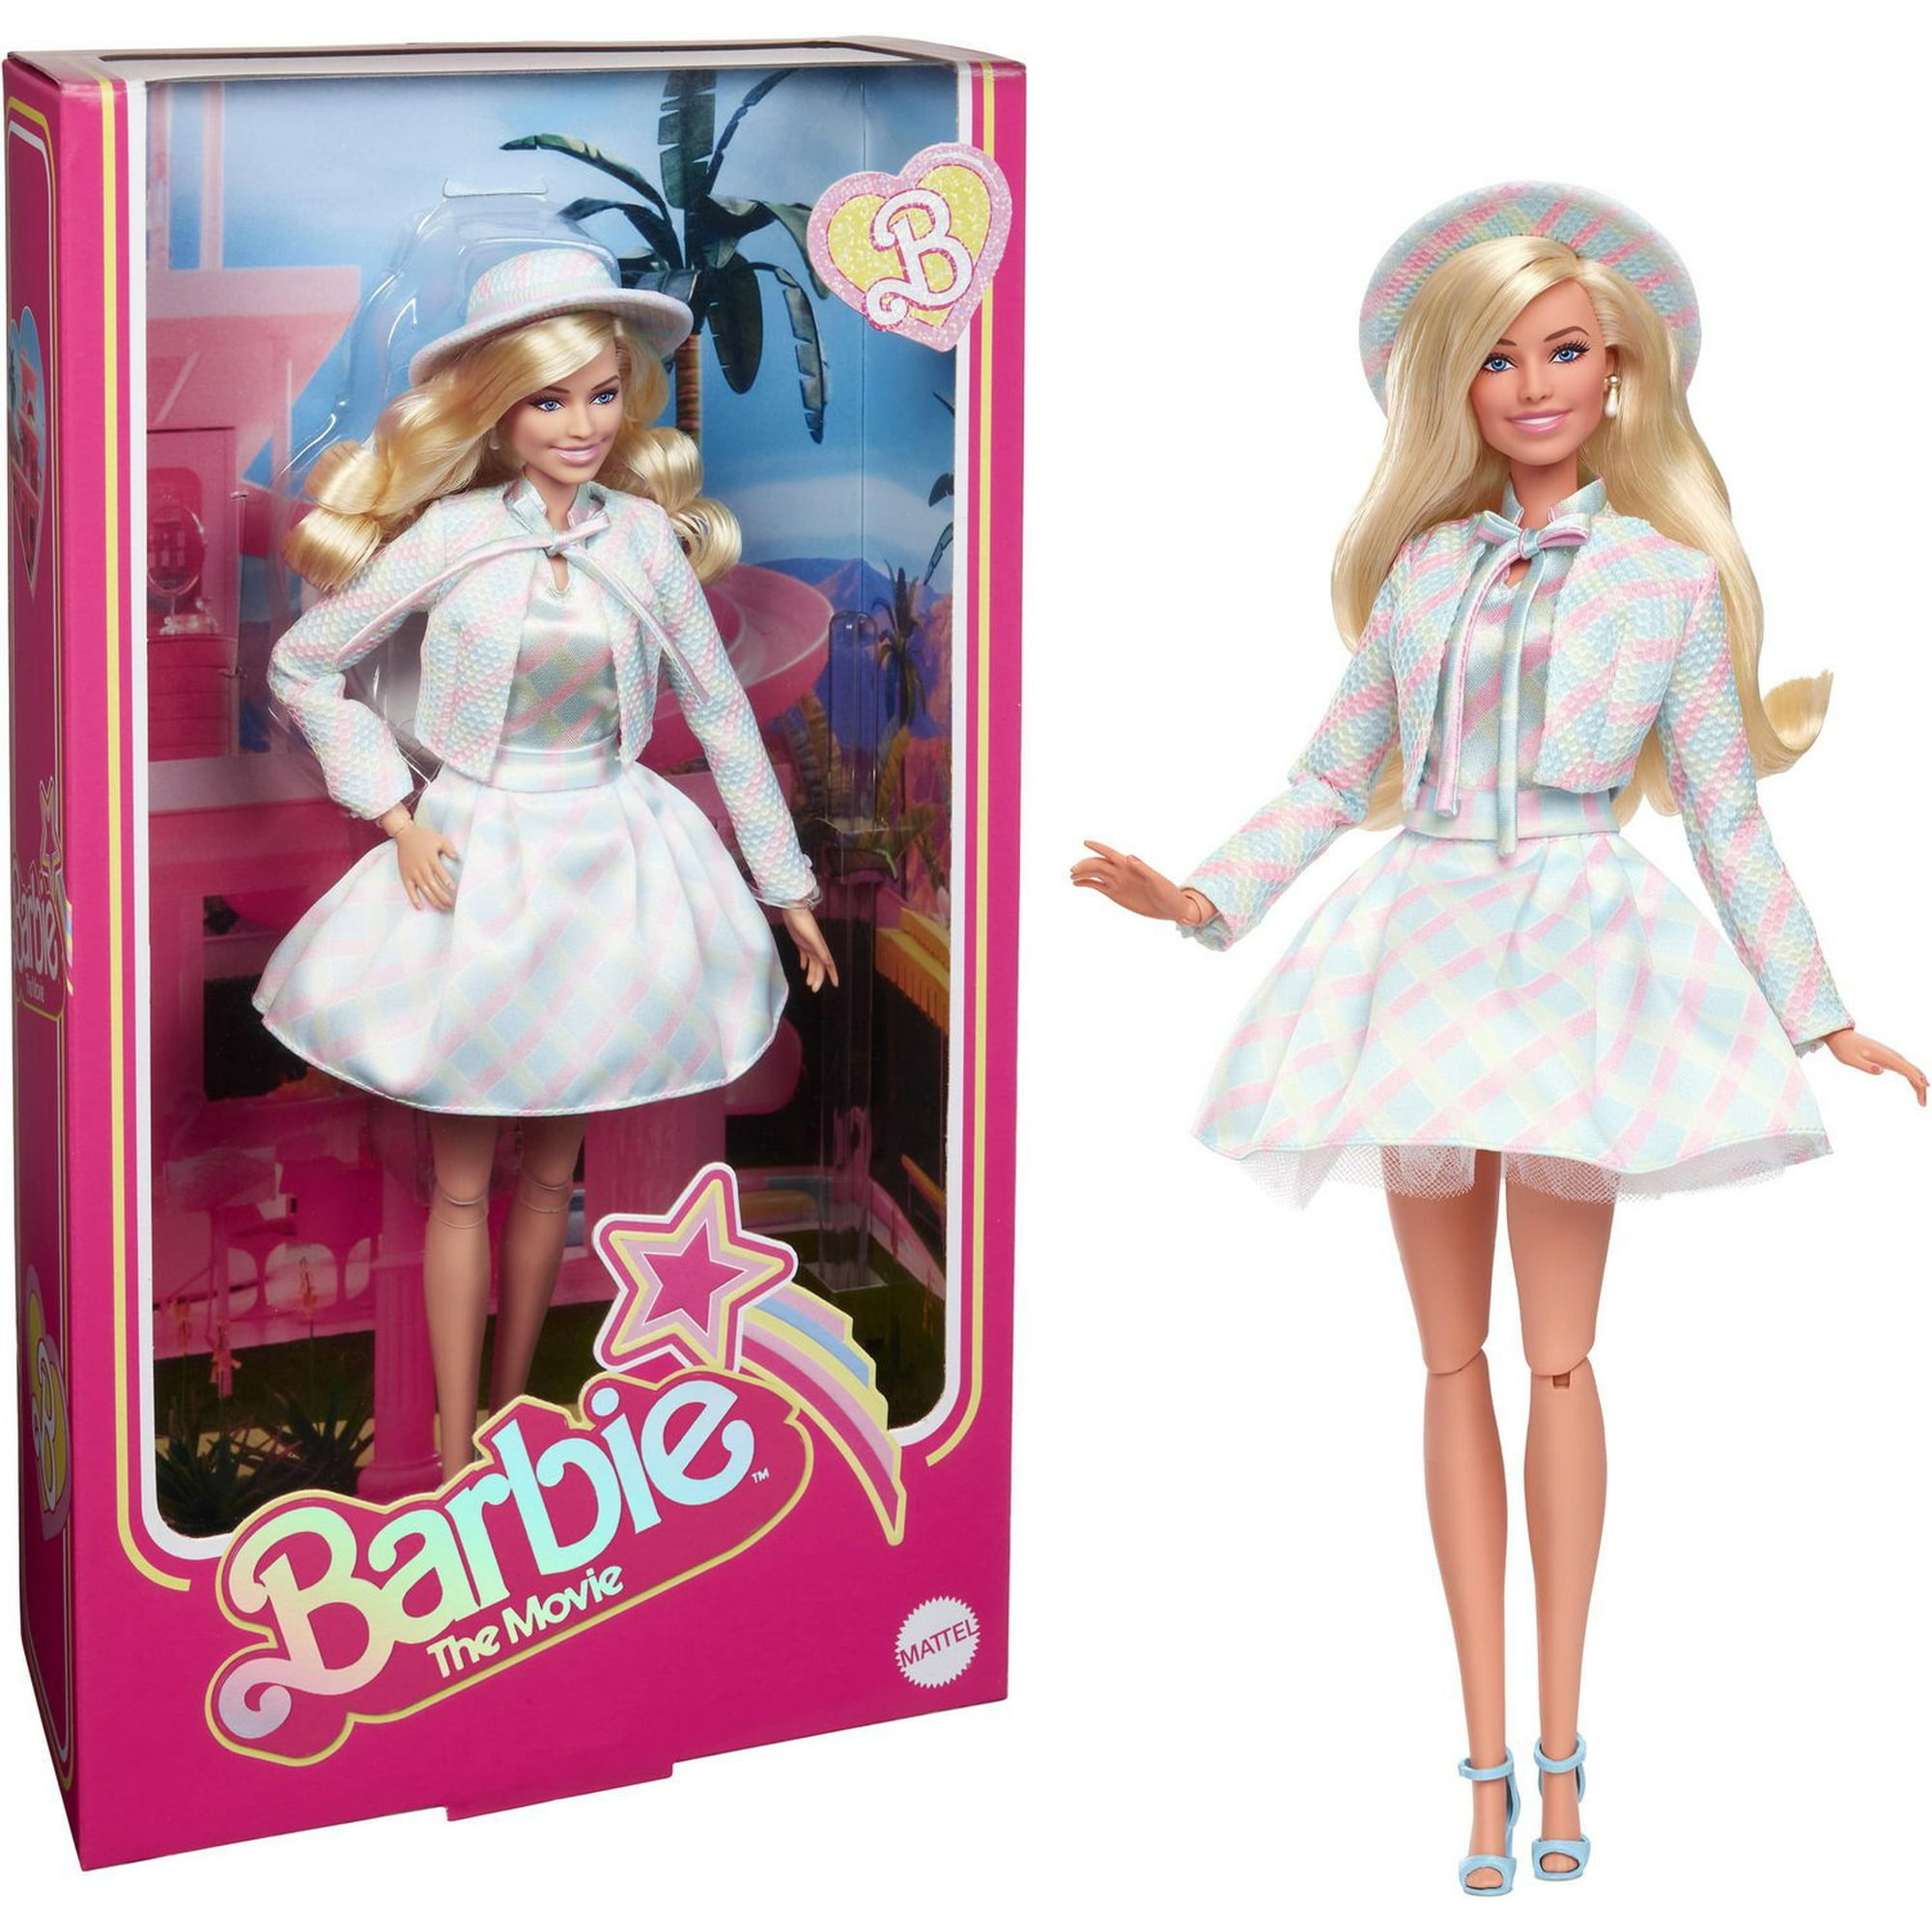 Barbie The Movie Doll, Margot Robbie as Barbie, Collectible Doll Wearing  Blue Plaid Matching Set with Matching Hat and Jacket 